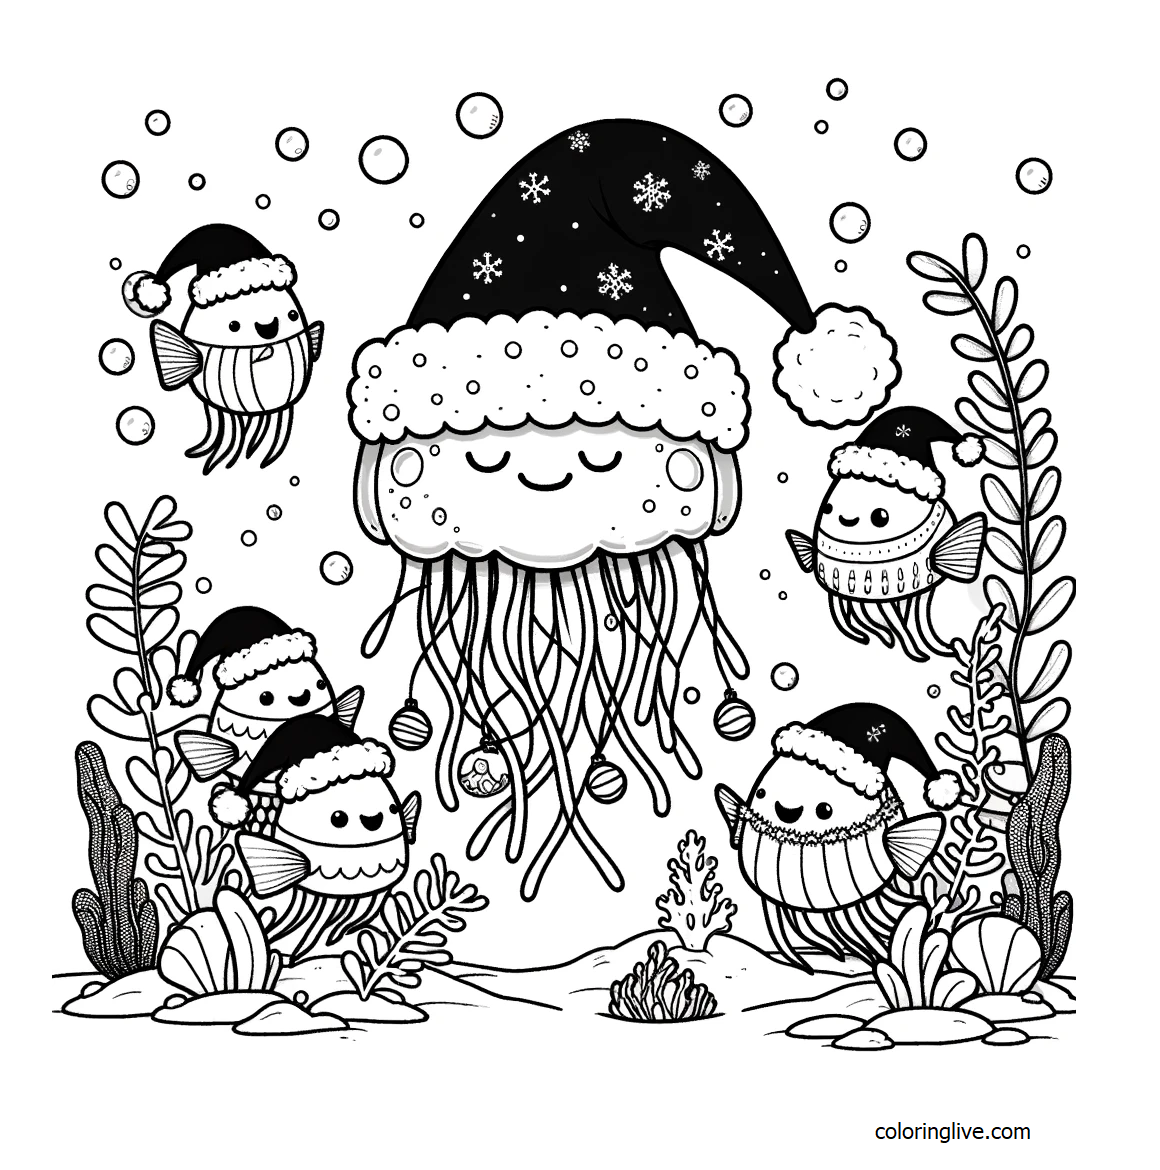 Jellyfish Coloring Page 1